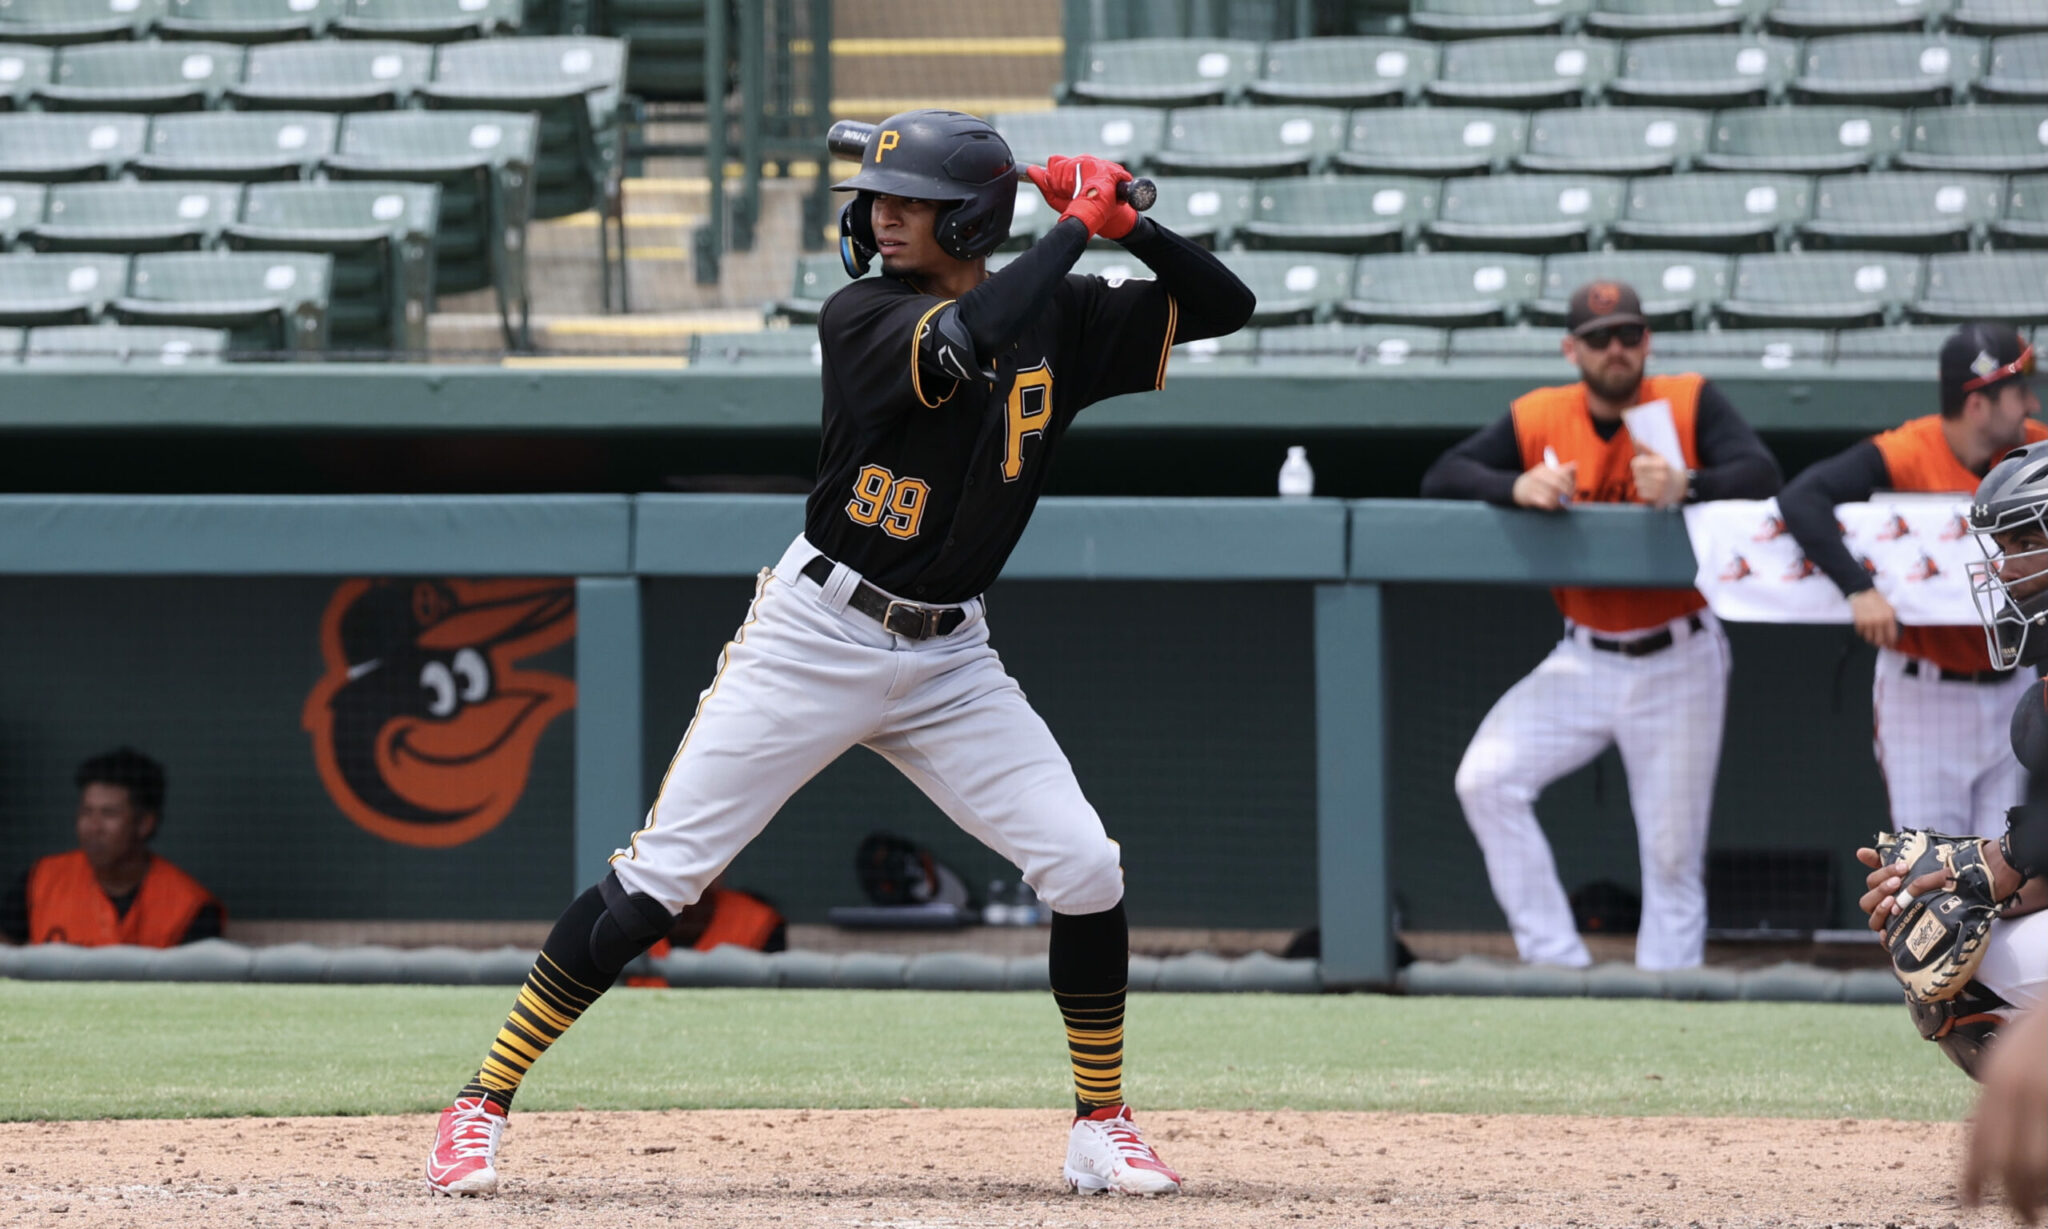 Pirates Winter Leagues: Another Multi-Hit Game for Jesus Castillo